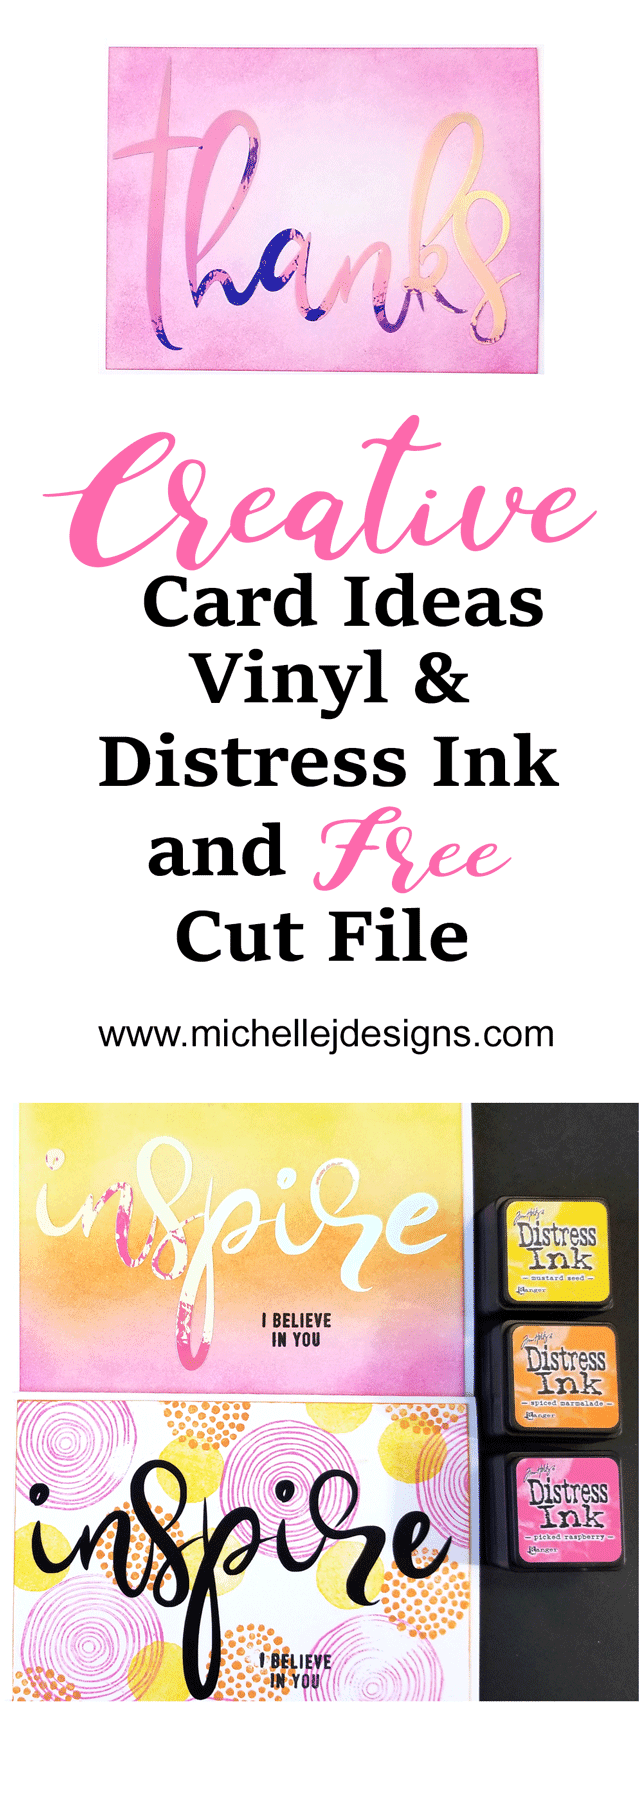 I love to show creative cardmaking ideas that are easy and look good. These cards combine a free vinyl cut file and some distress ink for a simple, colorful look - www.michellejdesigns.com #styletechcraft #opalvinyl #styletechcraftopal